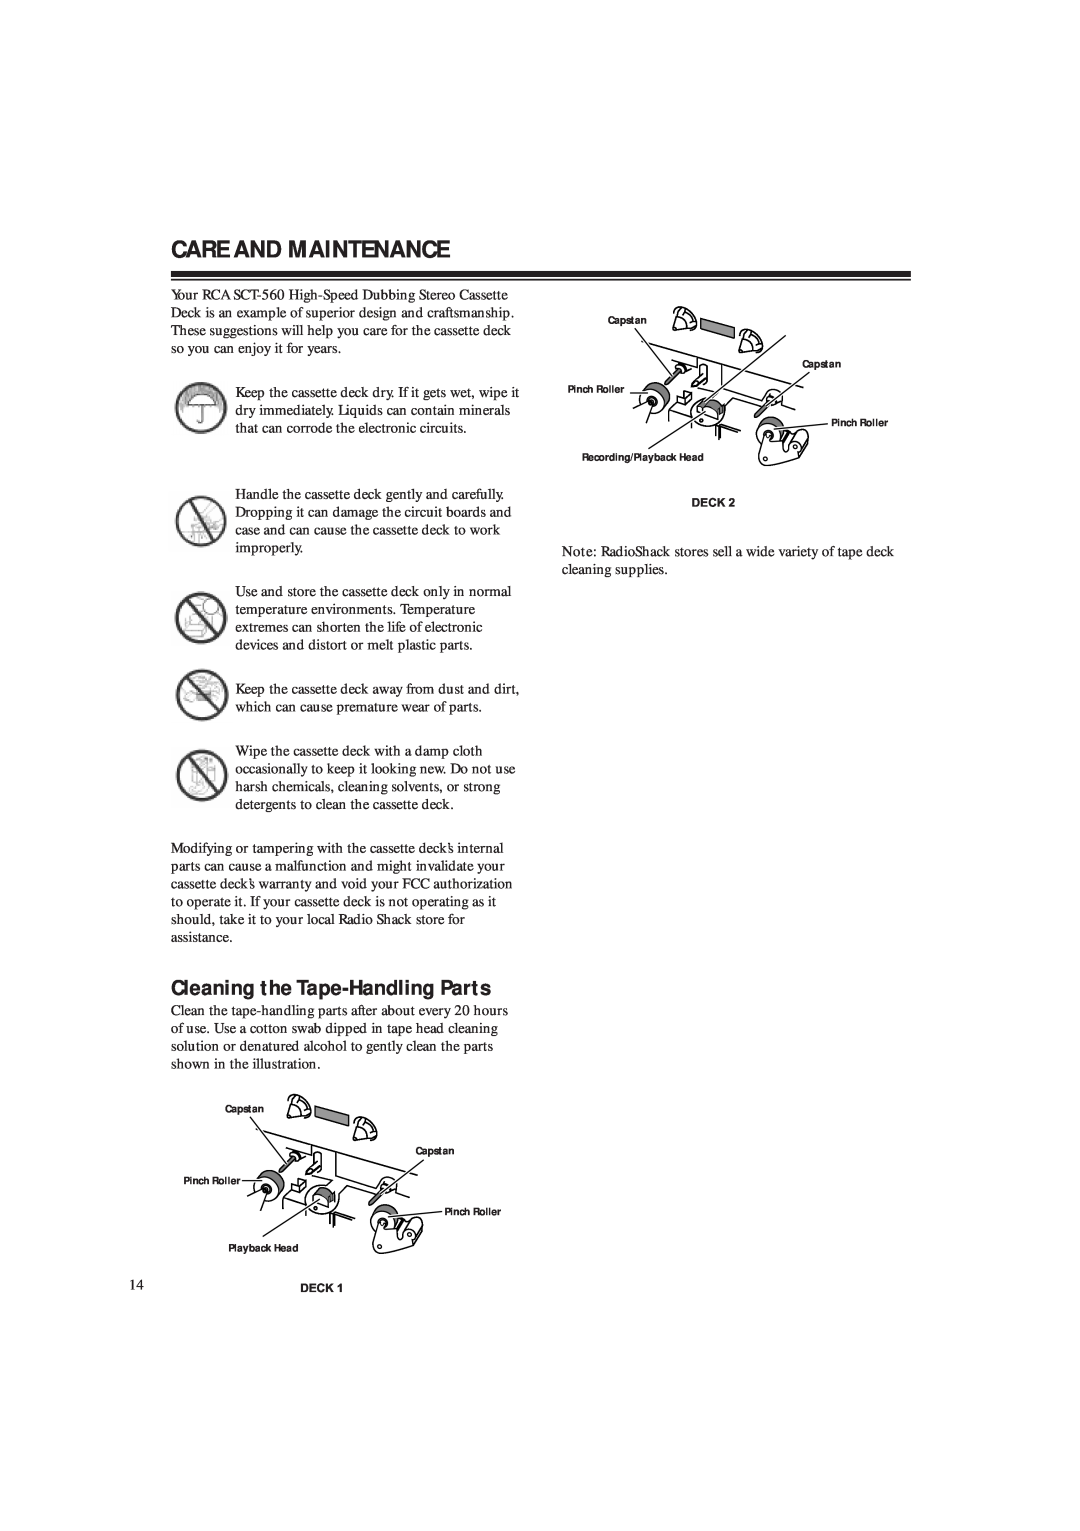 RCA SCT-560 owner manual Care And Maintenance, Cleaning the Tape-HandlingParts 